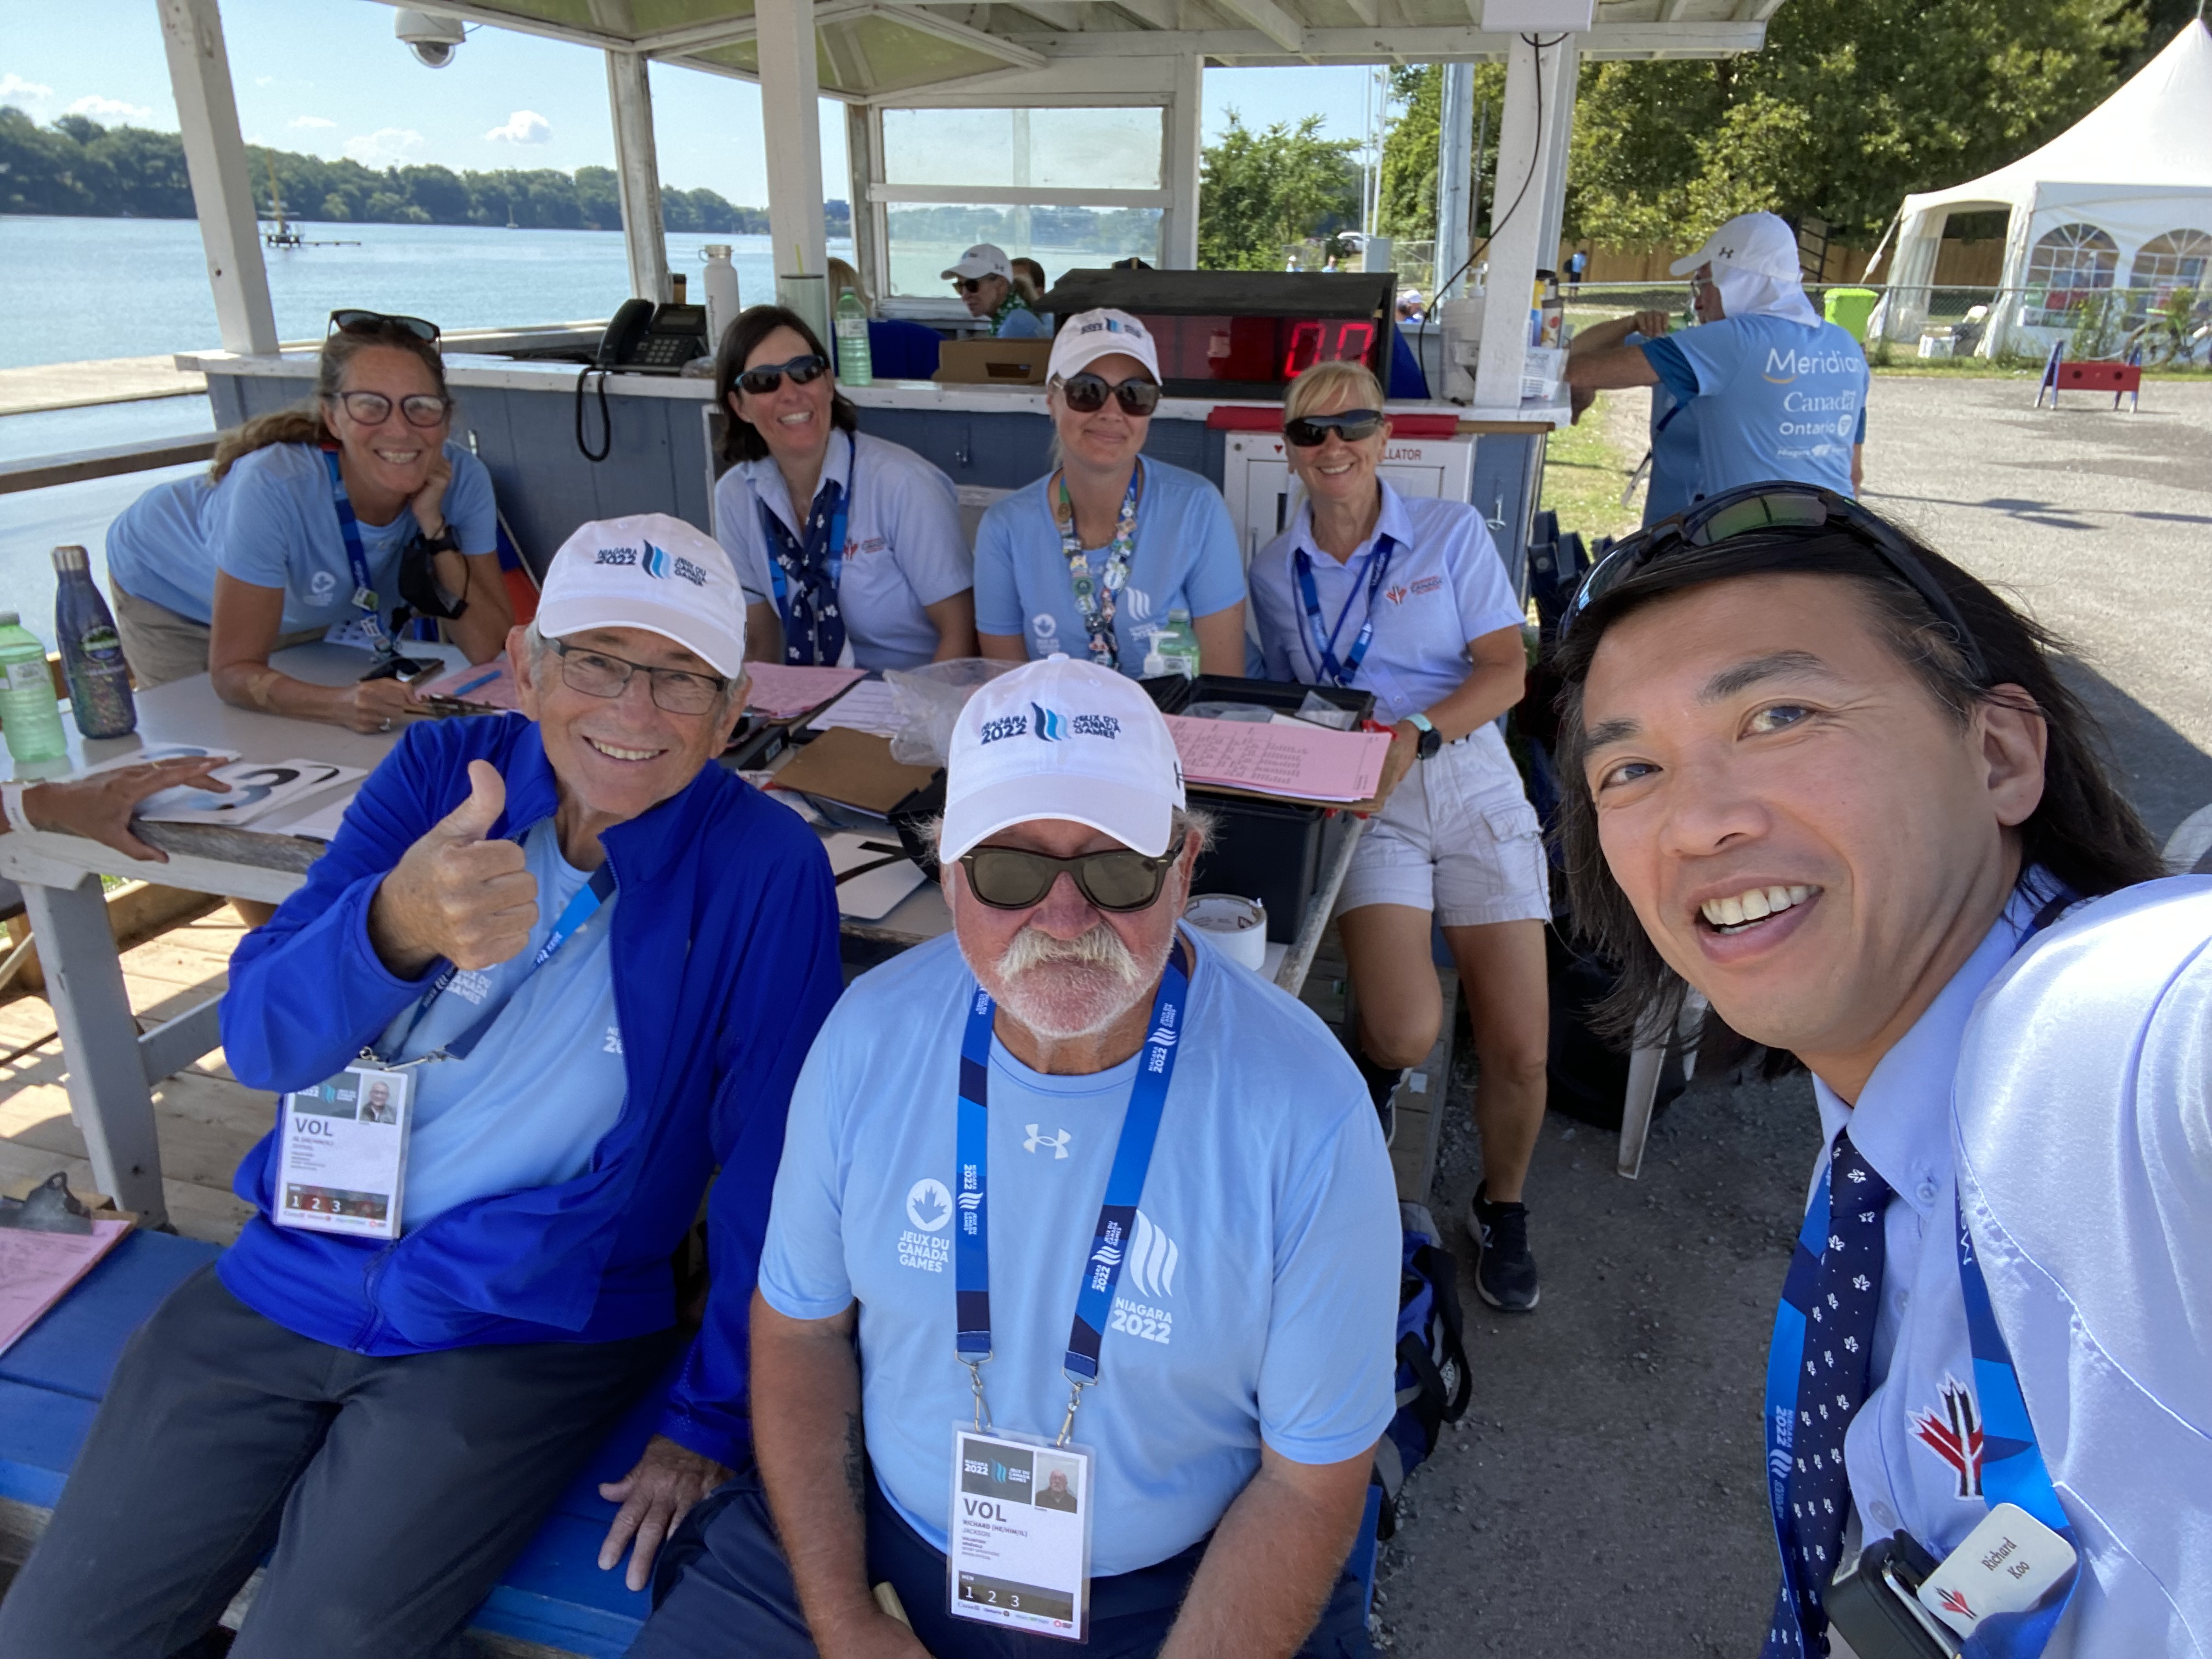 Richard Koo with fellow umpires at the 2022 Canada Games